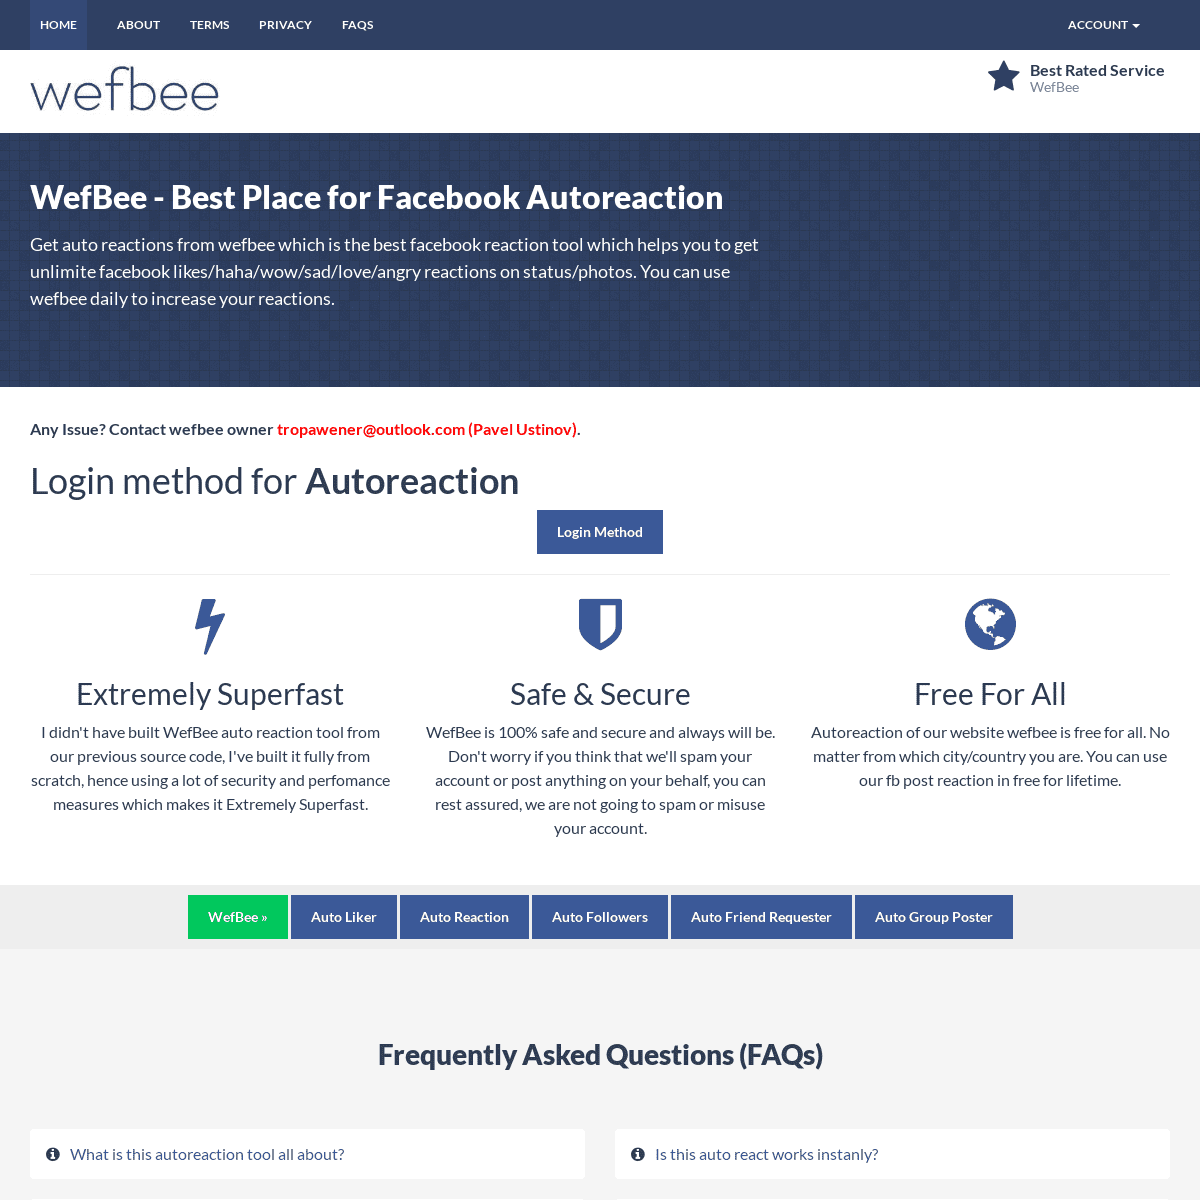 A complete backup of https://wefbee.com/autoreaction